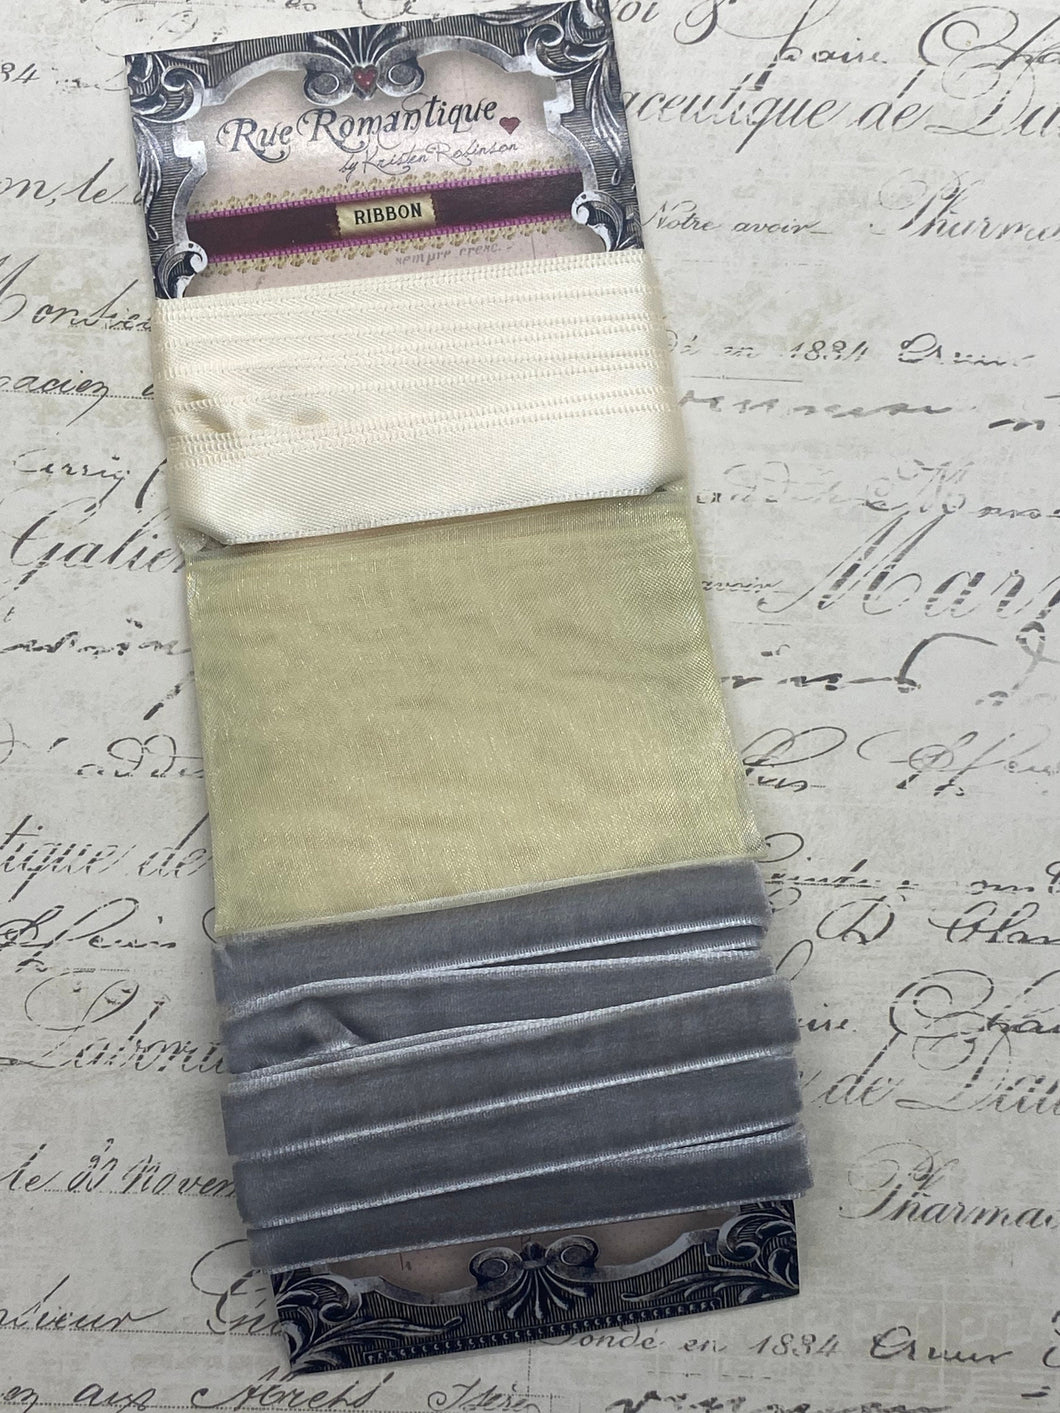 Rue Romantique Pack of 3 Ribbons- Gray